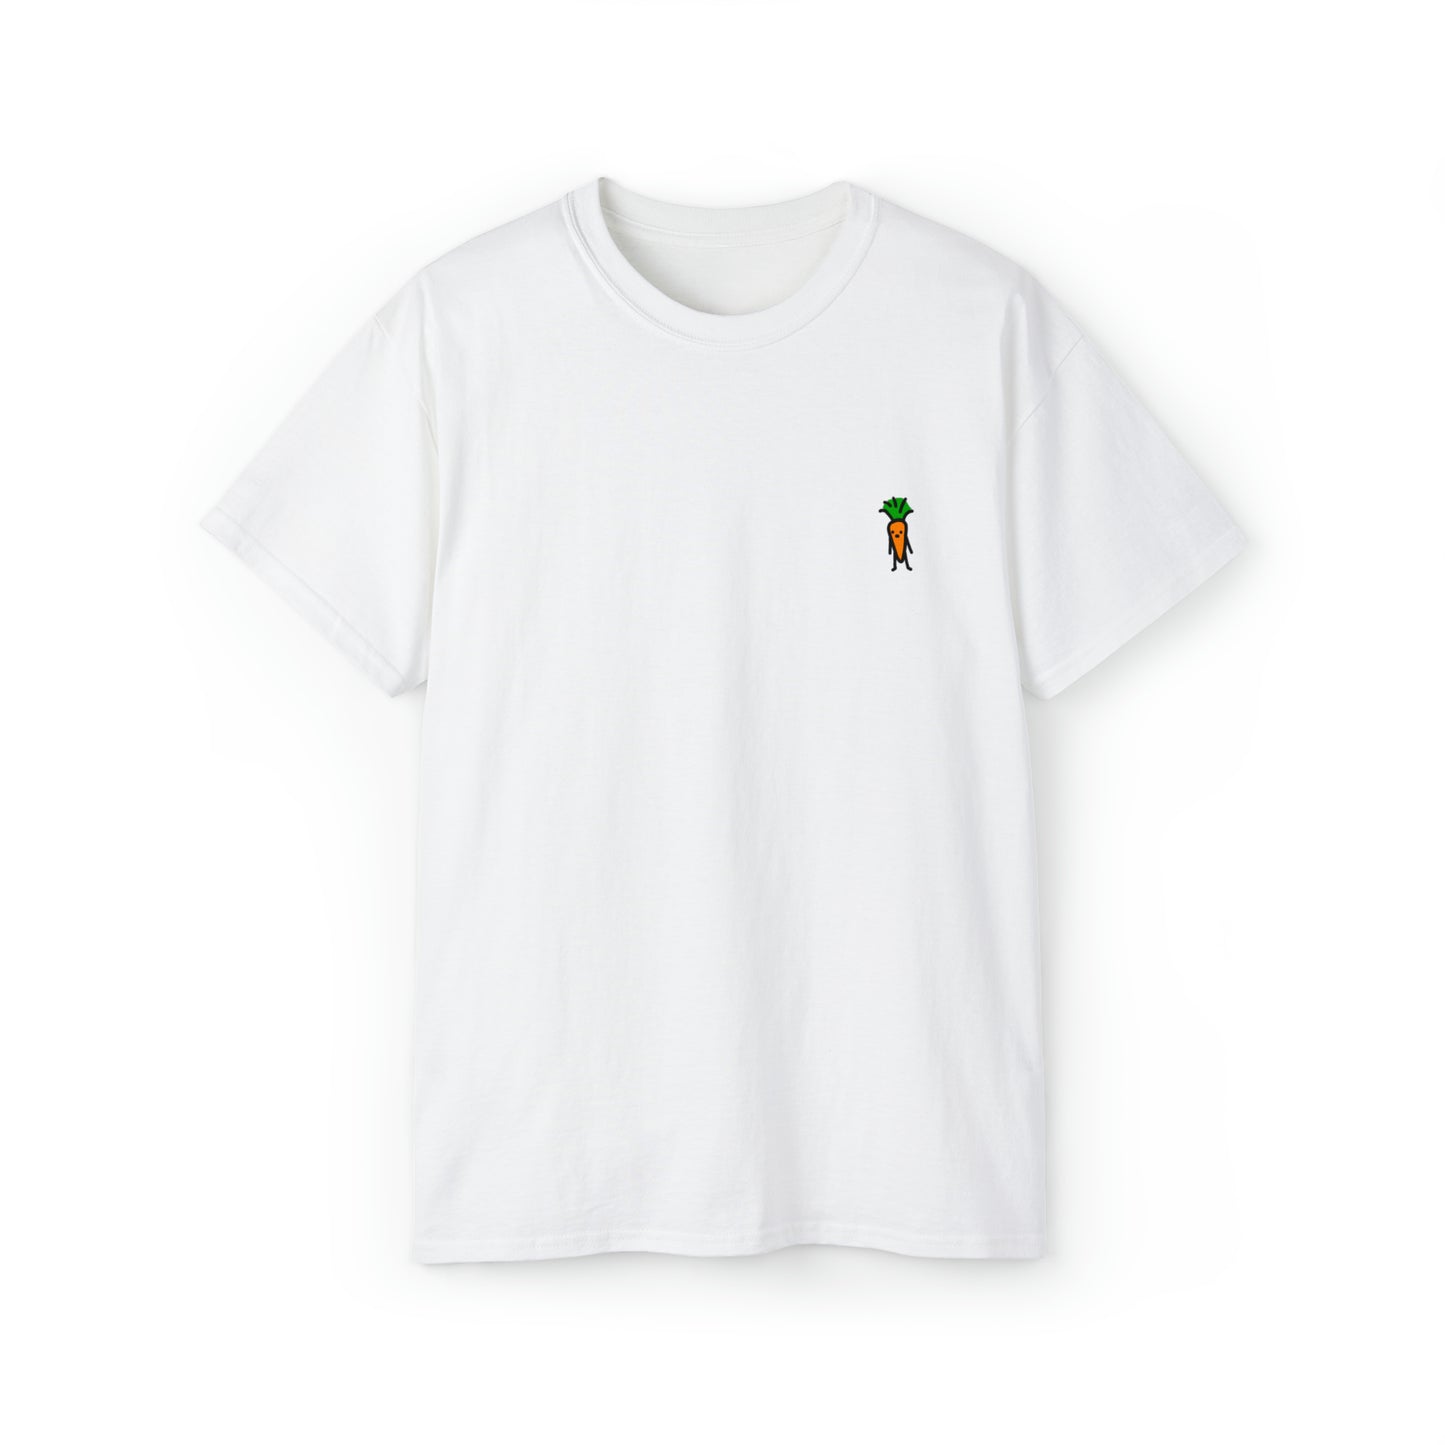 Small Carrot - Adult Unisex Ultra Cotton Tee